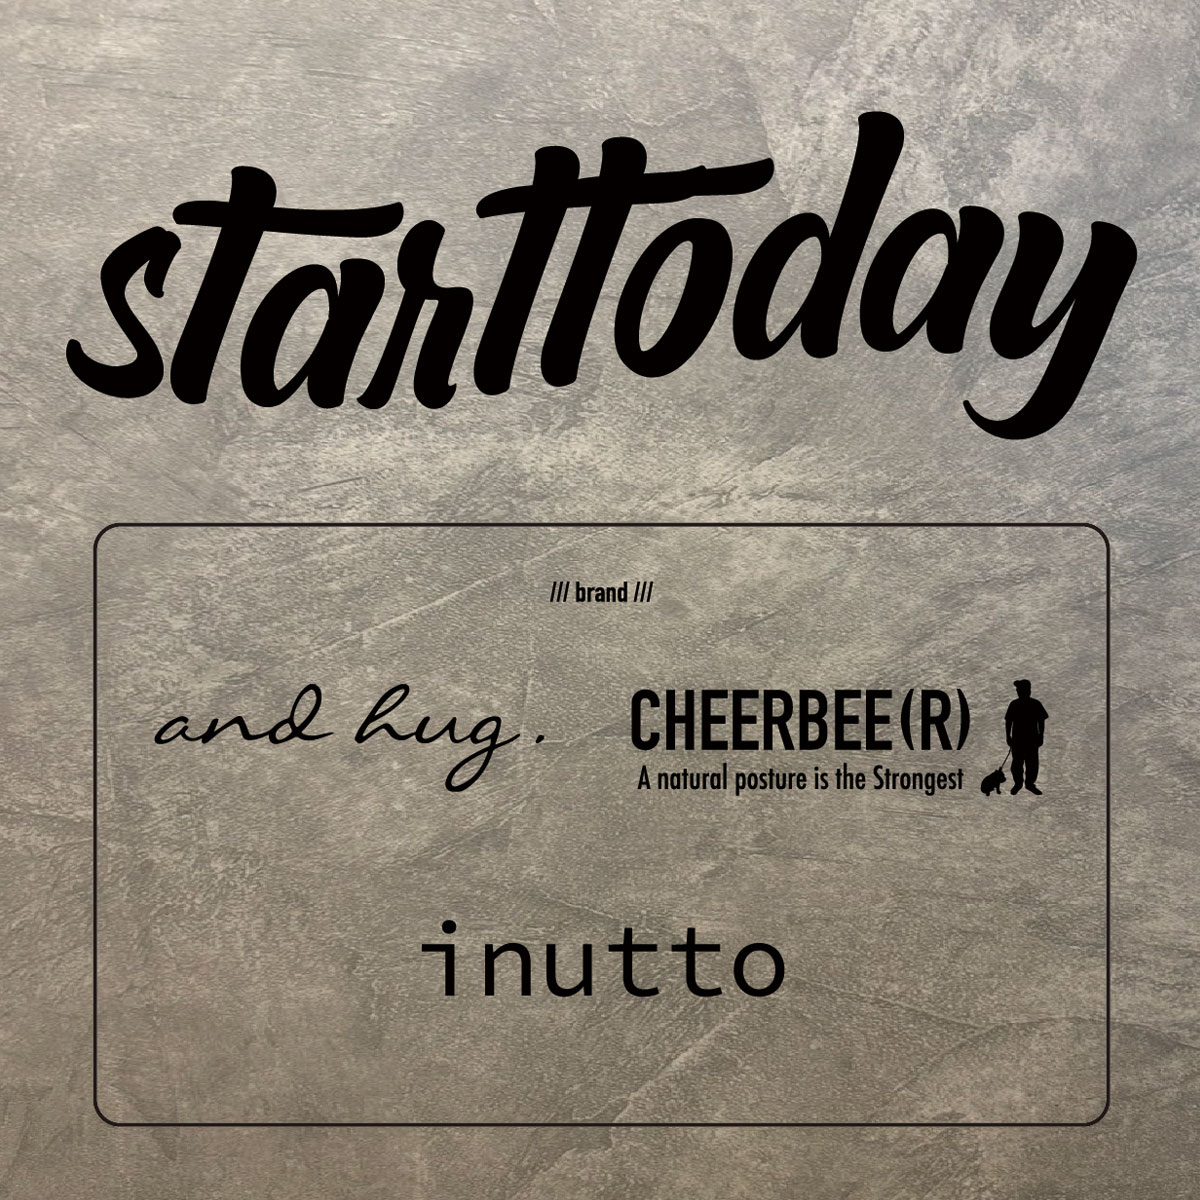 starttoday(and hug.<br>/inutto/CHEERBEE(R))
        